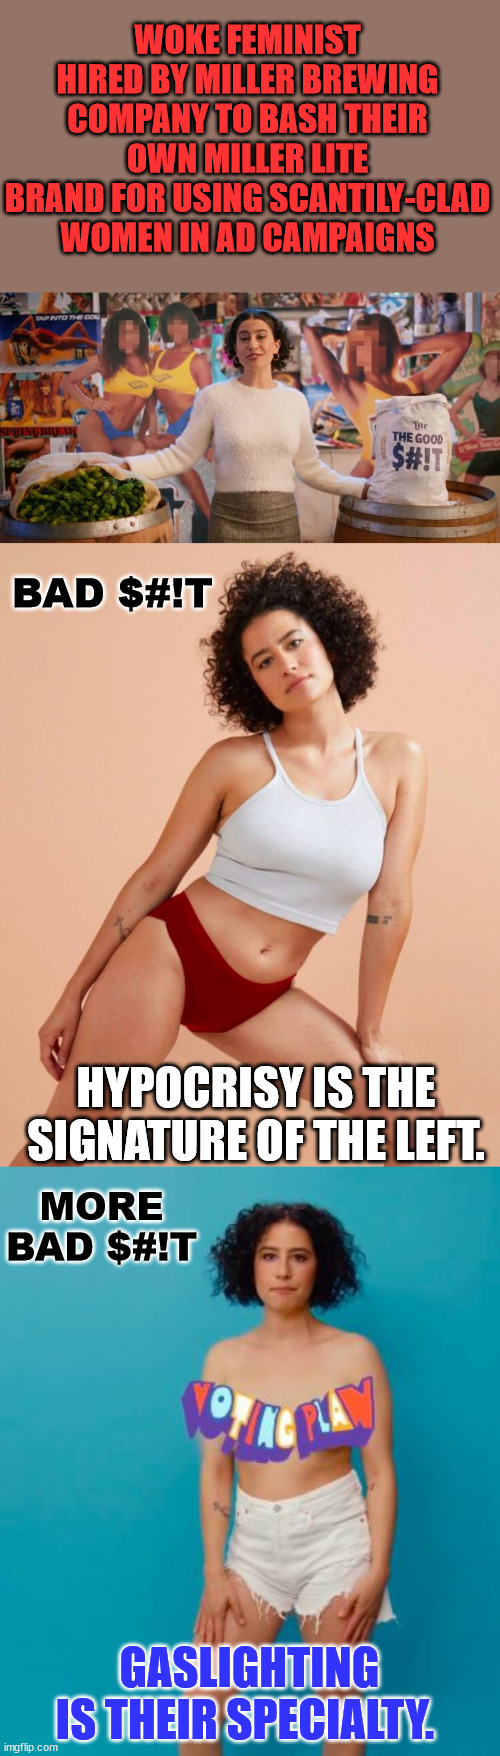 Hypocrisy is the signature of the Left. Gaslighting is their specialty. | WOKE FEMINIST HIRED BY MILLER BREWING COMPANY TO BASH THEIR OWN MILLER LITE BRAND FOR USING SCANTILY-CLAD WOMEN IN AD CAMPAIGNS; BAD $#!T; HYPOCRISY IS THE SIGNATURE OF THE LEFT. MORE BAD $#!T; GASLIGHTING IS THEIR SPECIALTY. | image tagged in liberal hypocrisy | made w/ Imgflip meme maker